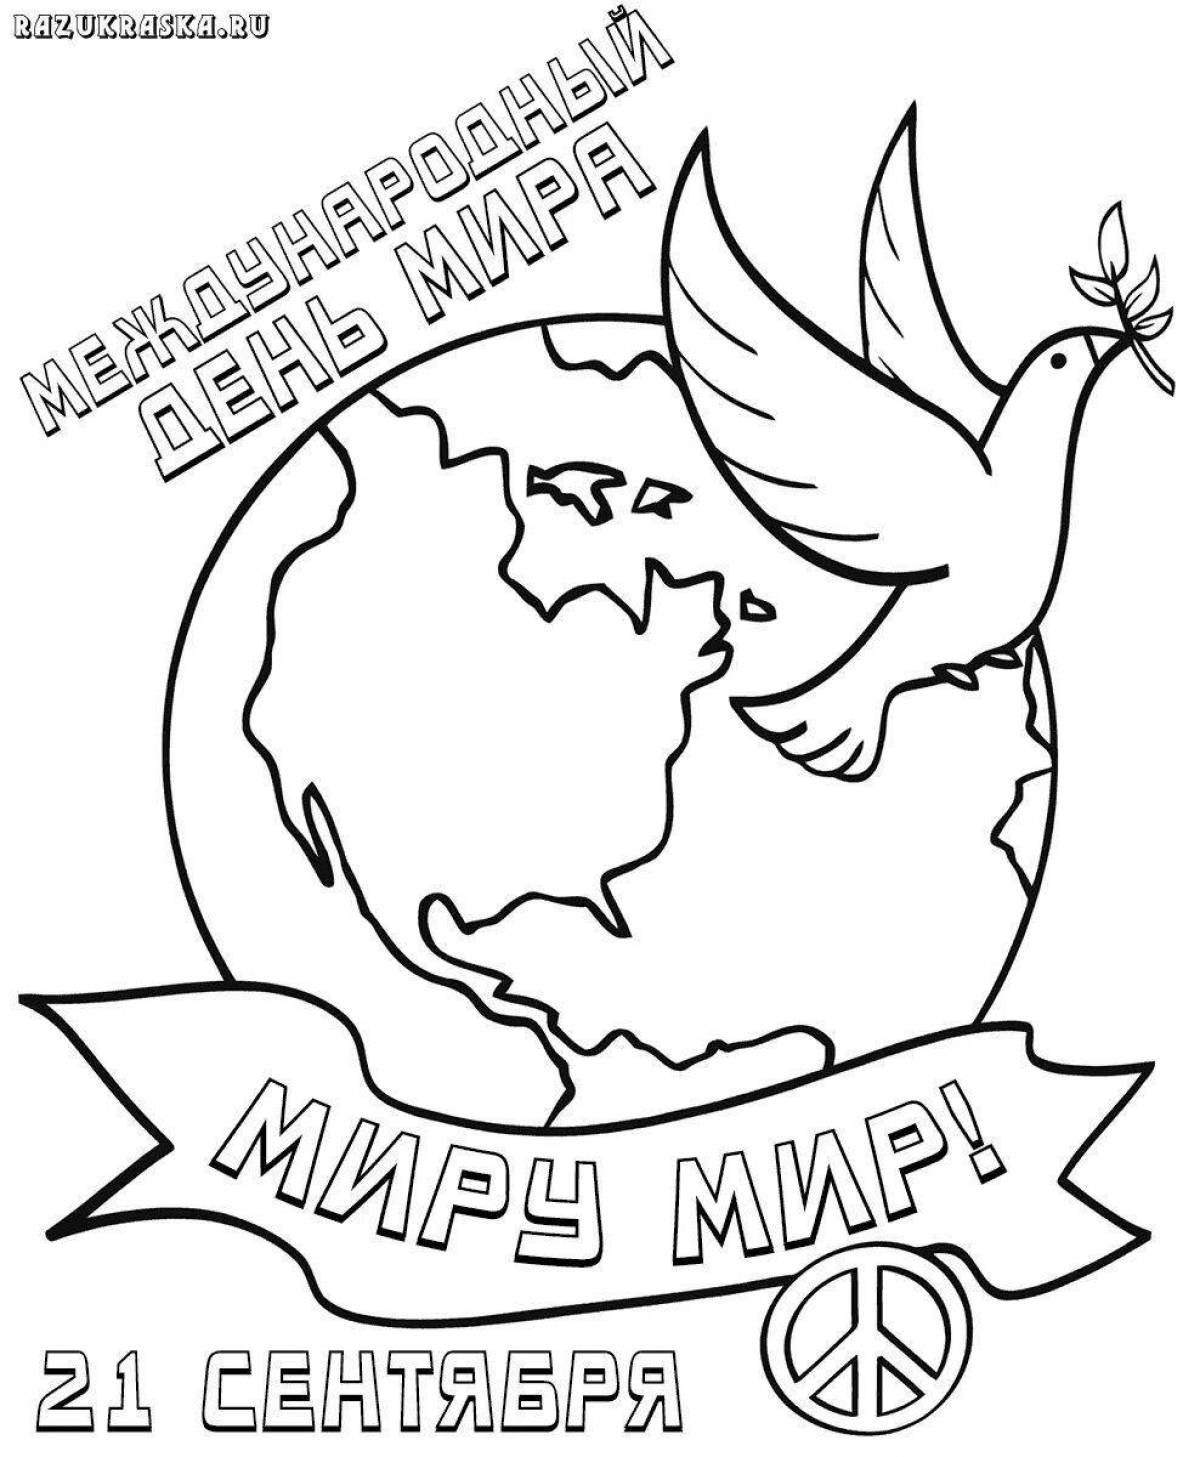 World peace without war coloring page